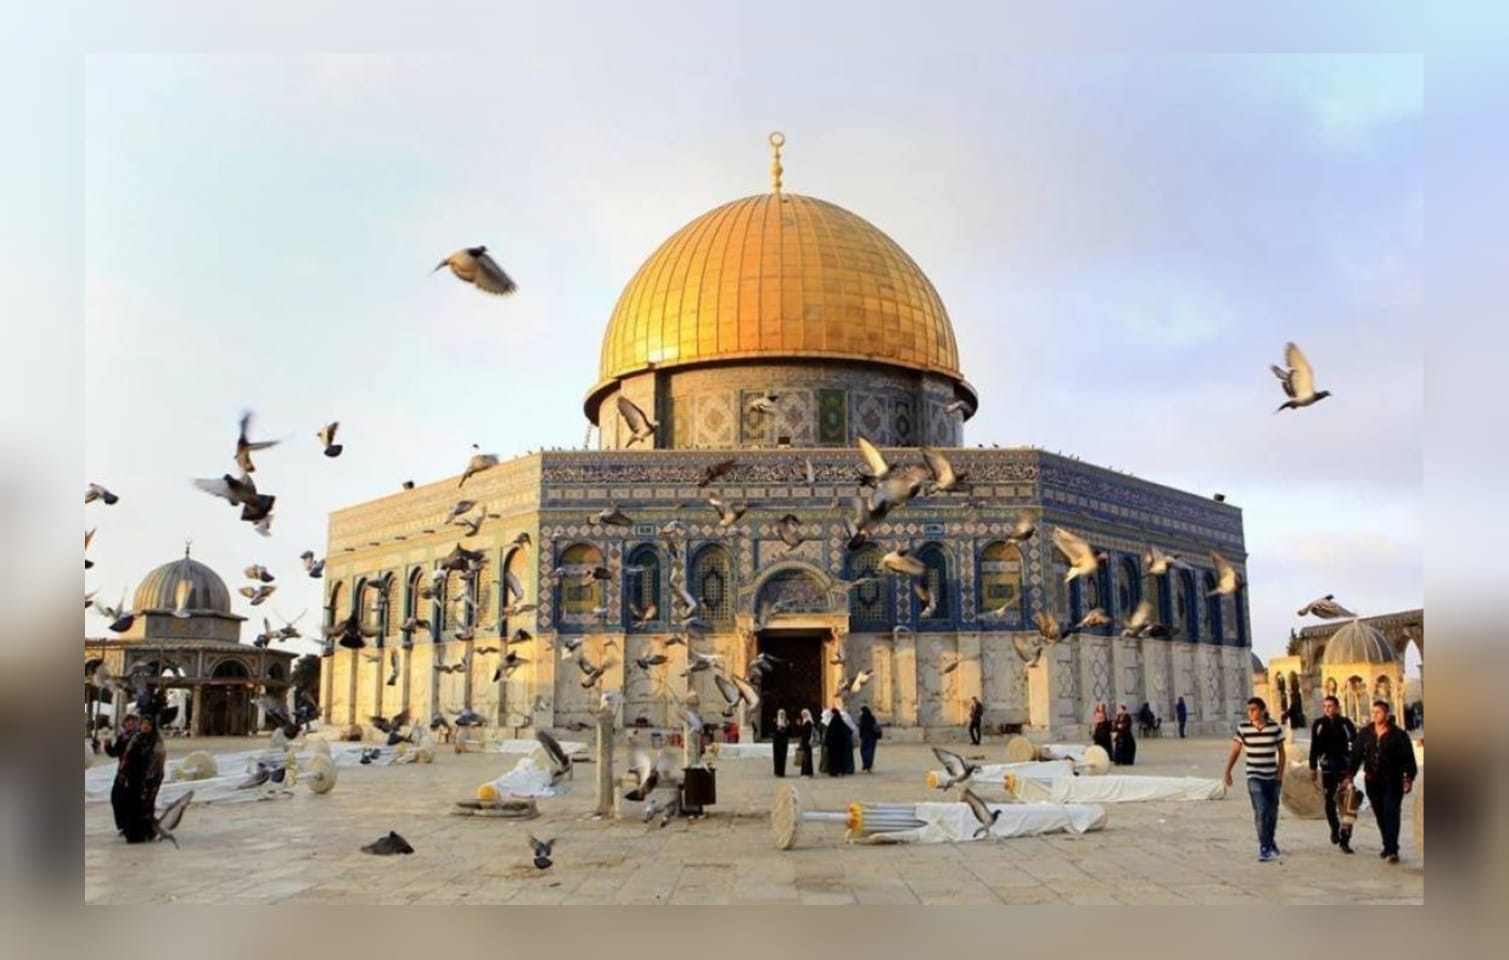  NCHR condems Al-Aqsa mosque storming, calls upon international community to address these violations 